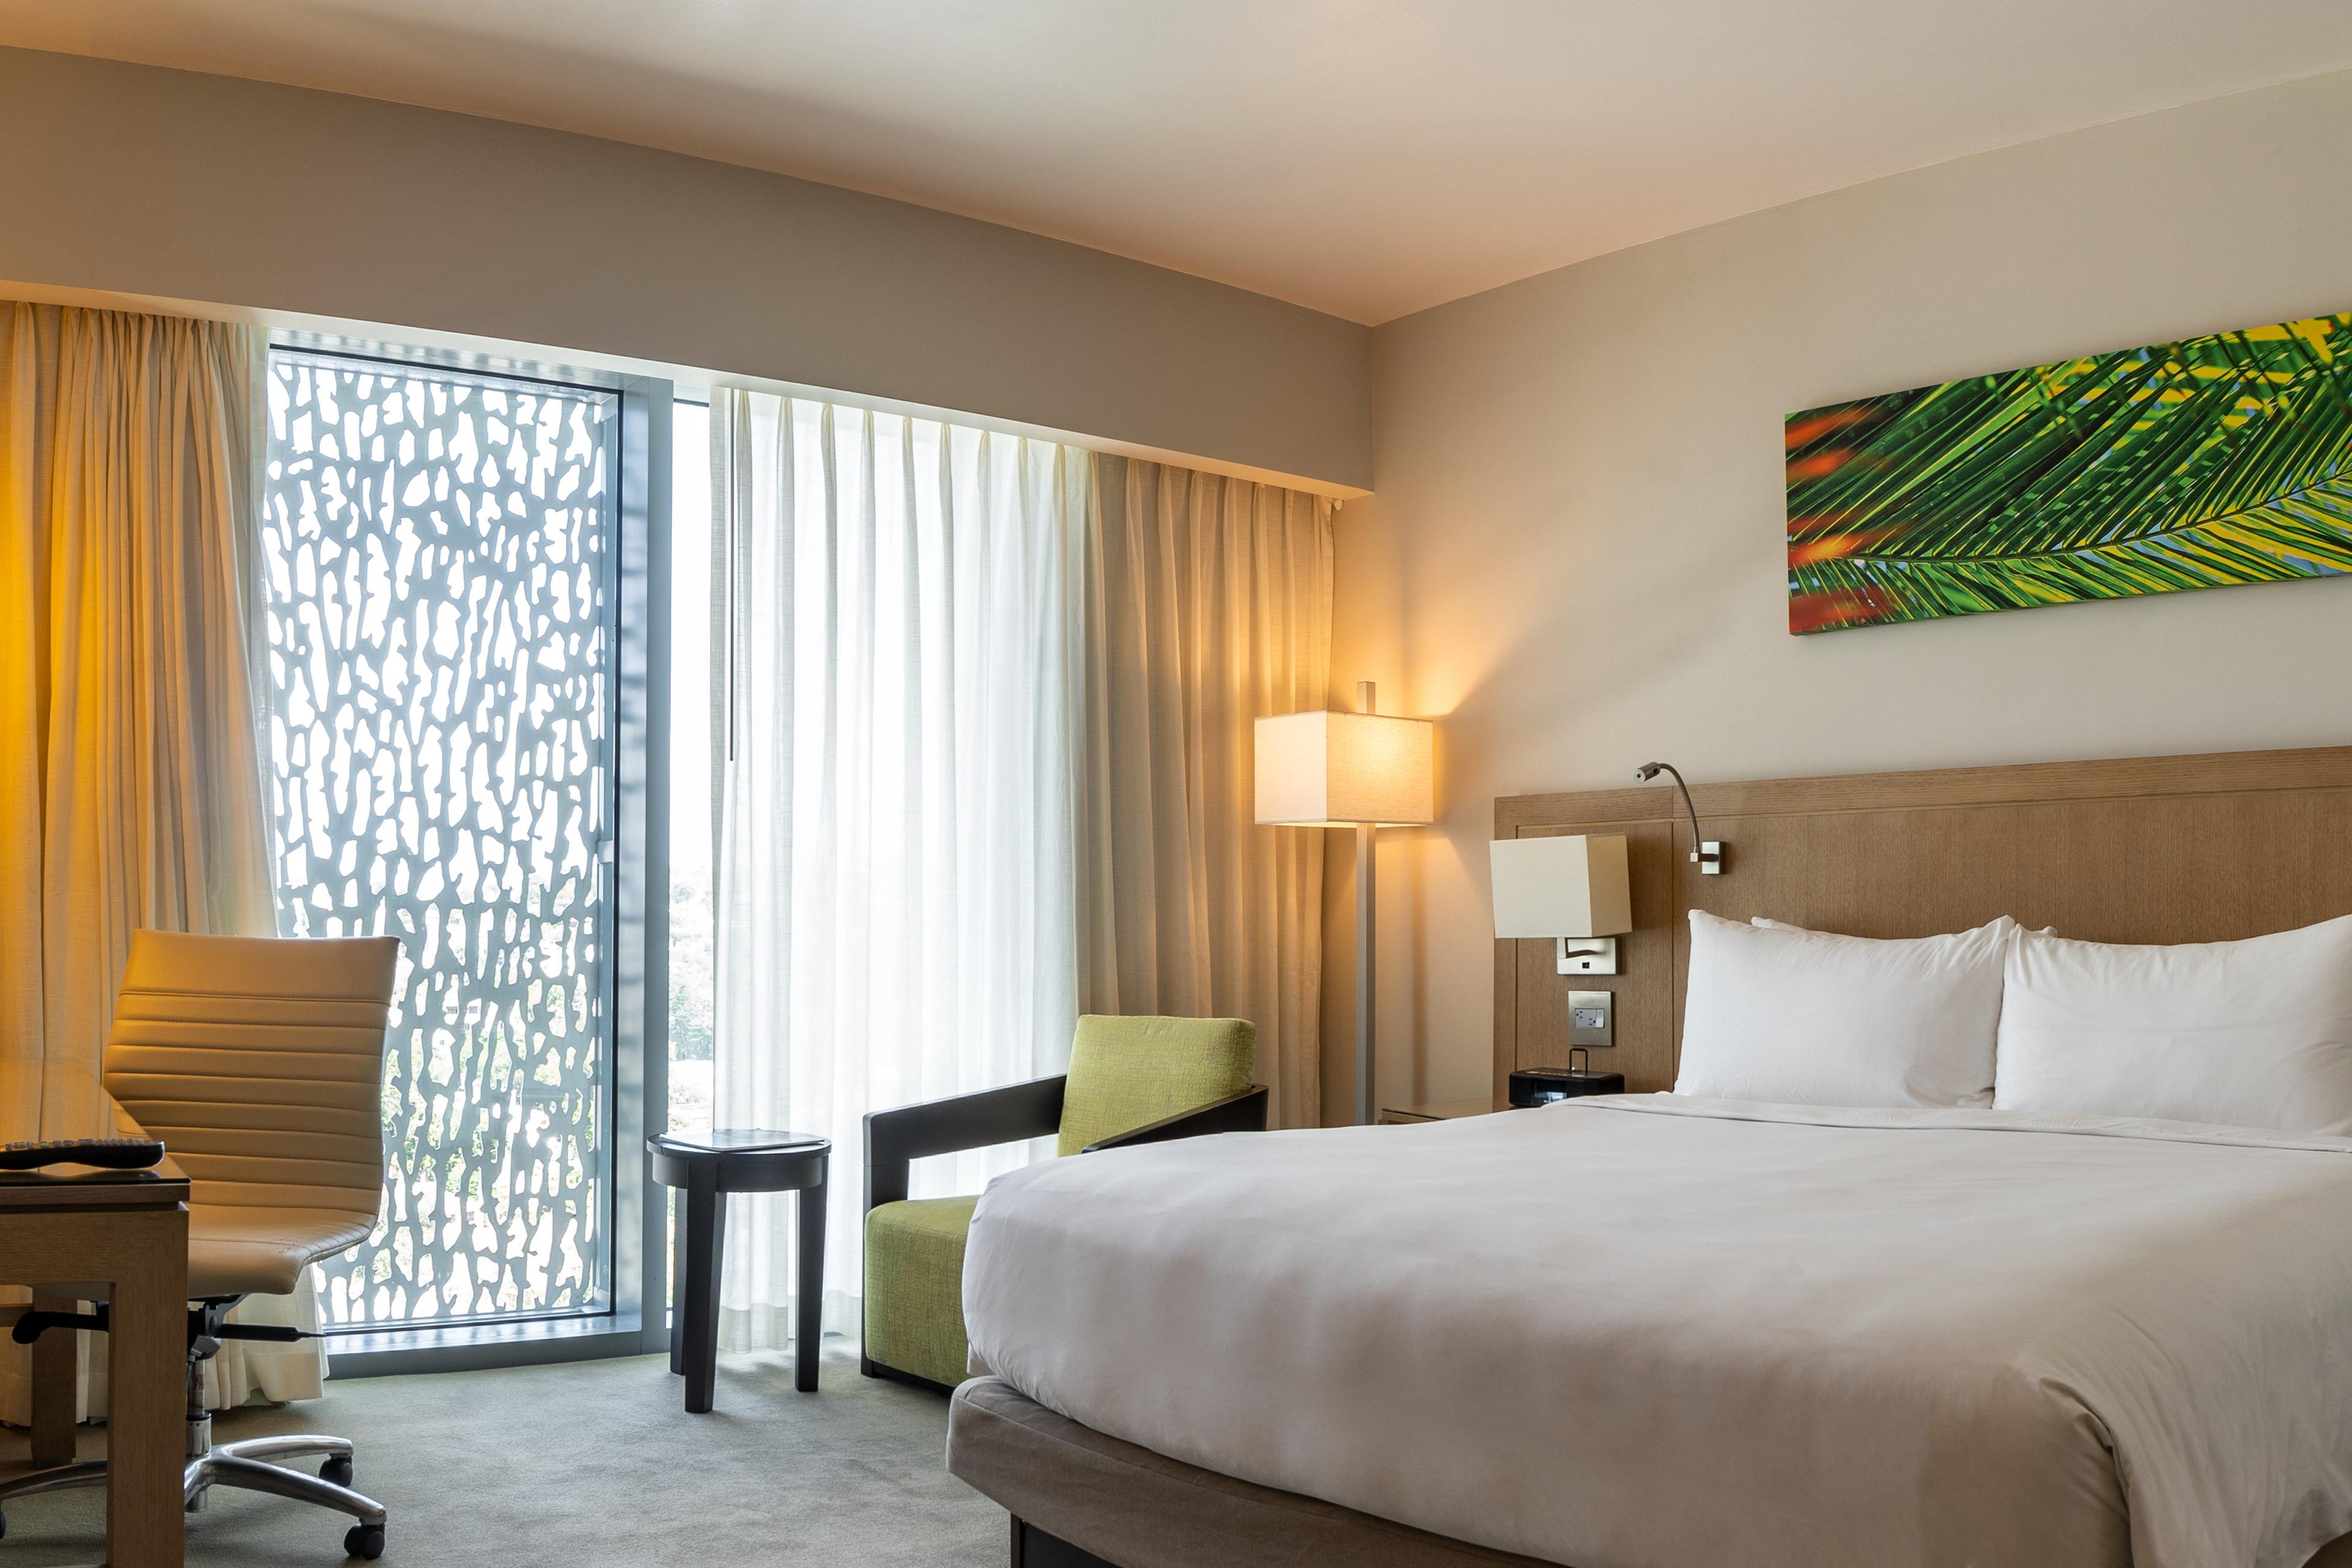 Enjoy maximum comfort at our fully equipped guestrooms featuring comfortable bedding, modern furniture and incredible city views